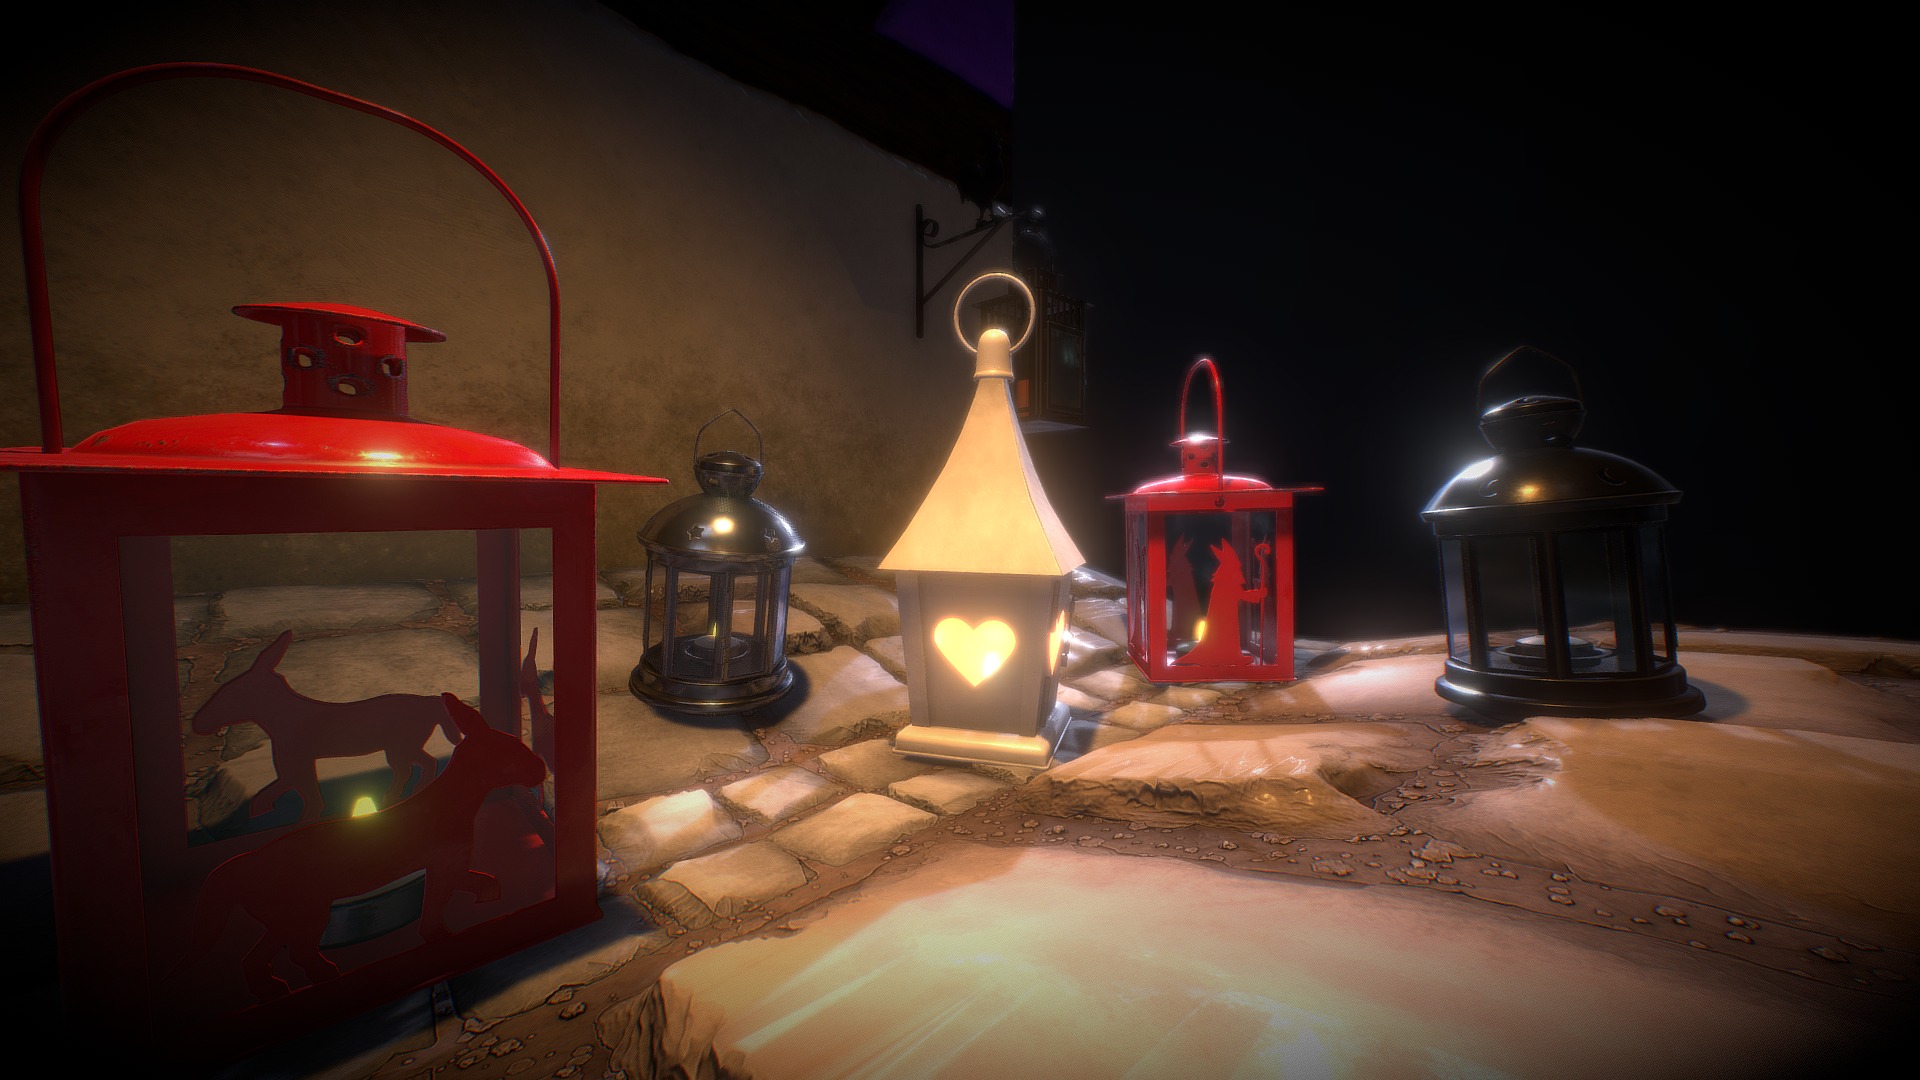 3D model Lanterns Showcase - This is a 3D model of the Lanterns Showcase. The 3D model is about a group of red and black lanterns.